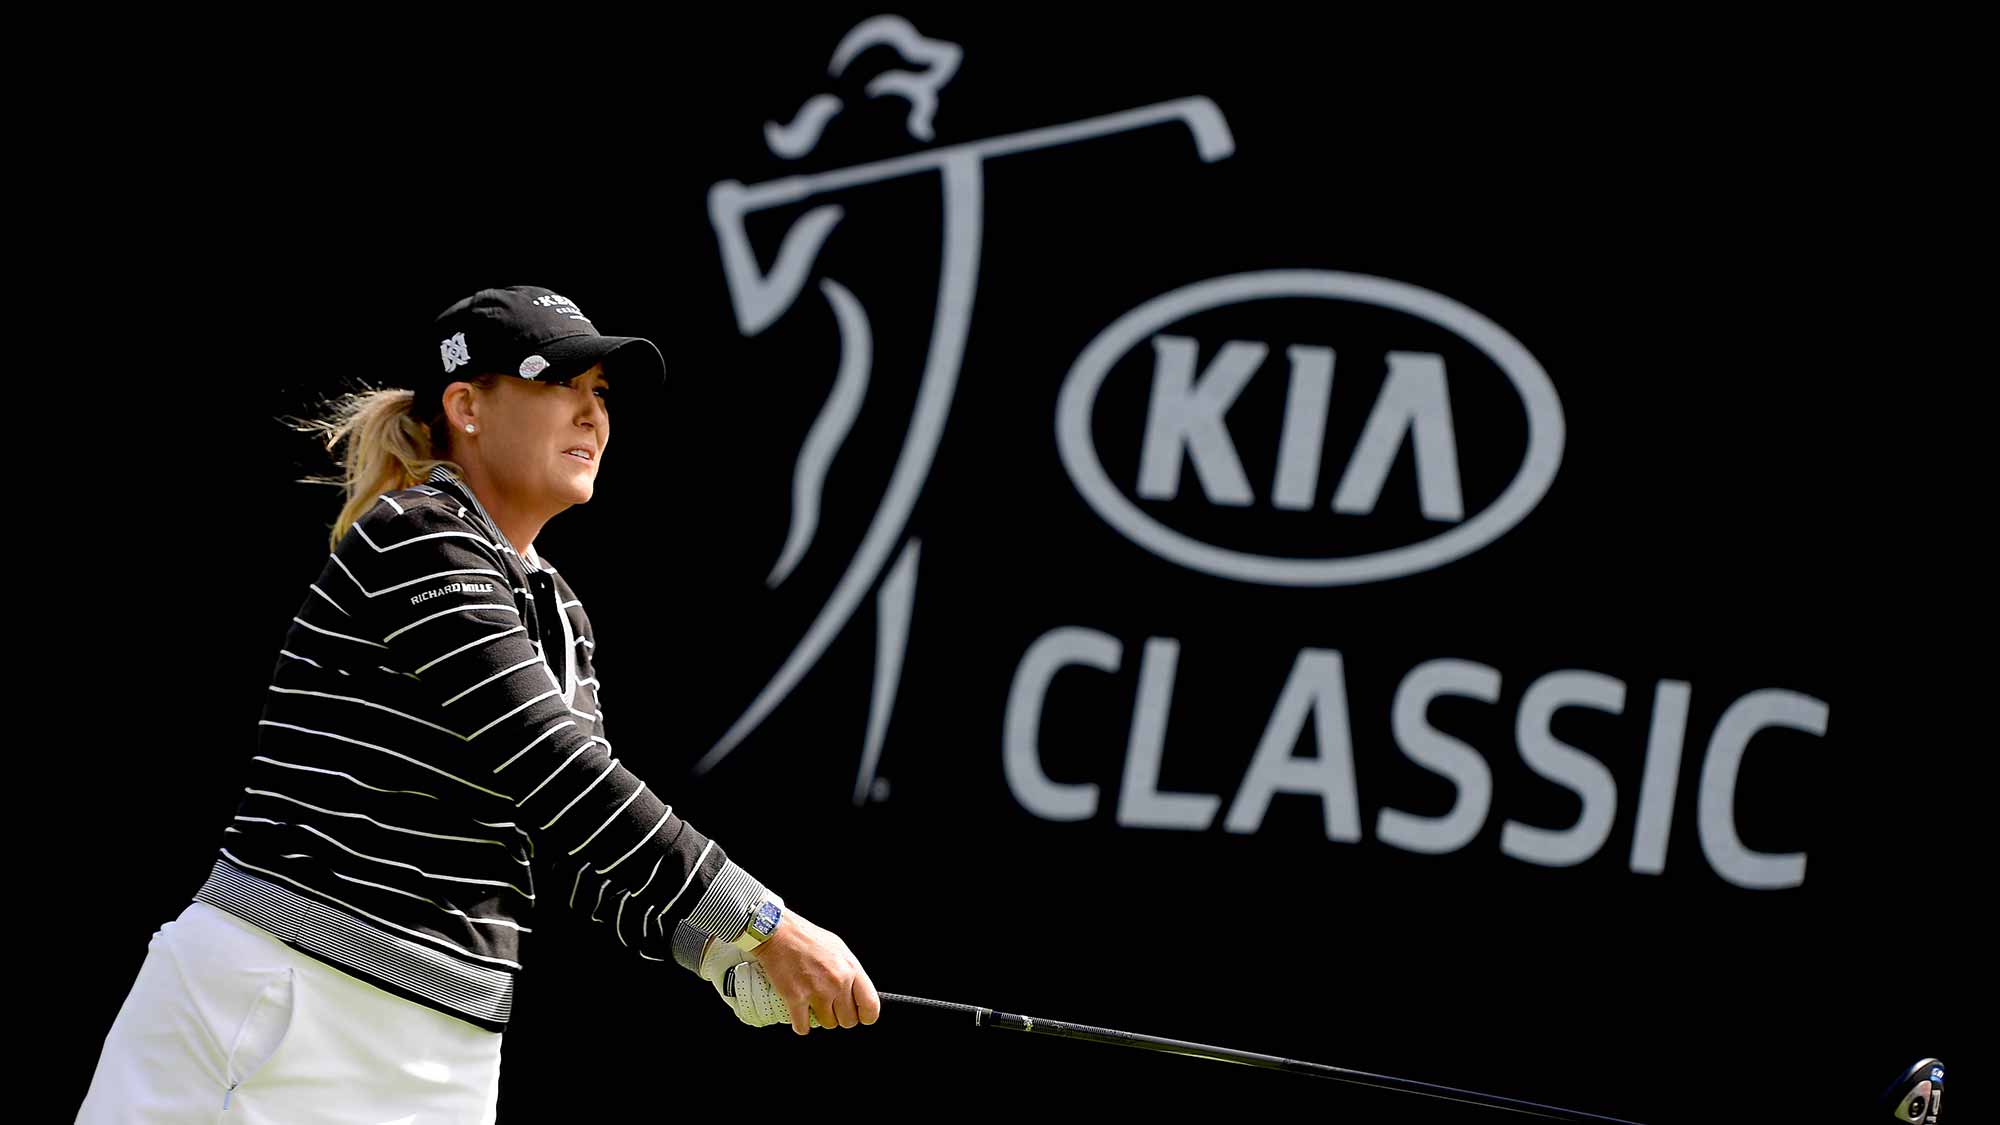 Cristie Kerr tees off the 1st hole during Round Three of the LPGA KIA CLASSIC at the Park Hyatt Aviara golf course on March 24, 2018 in Carlsbad, California